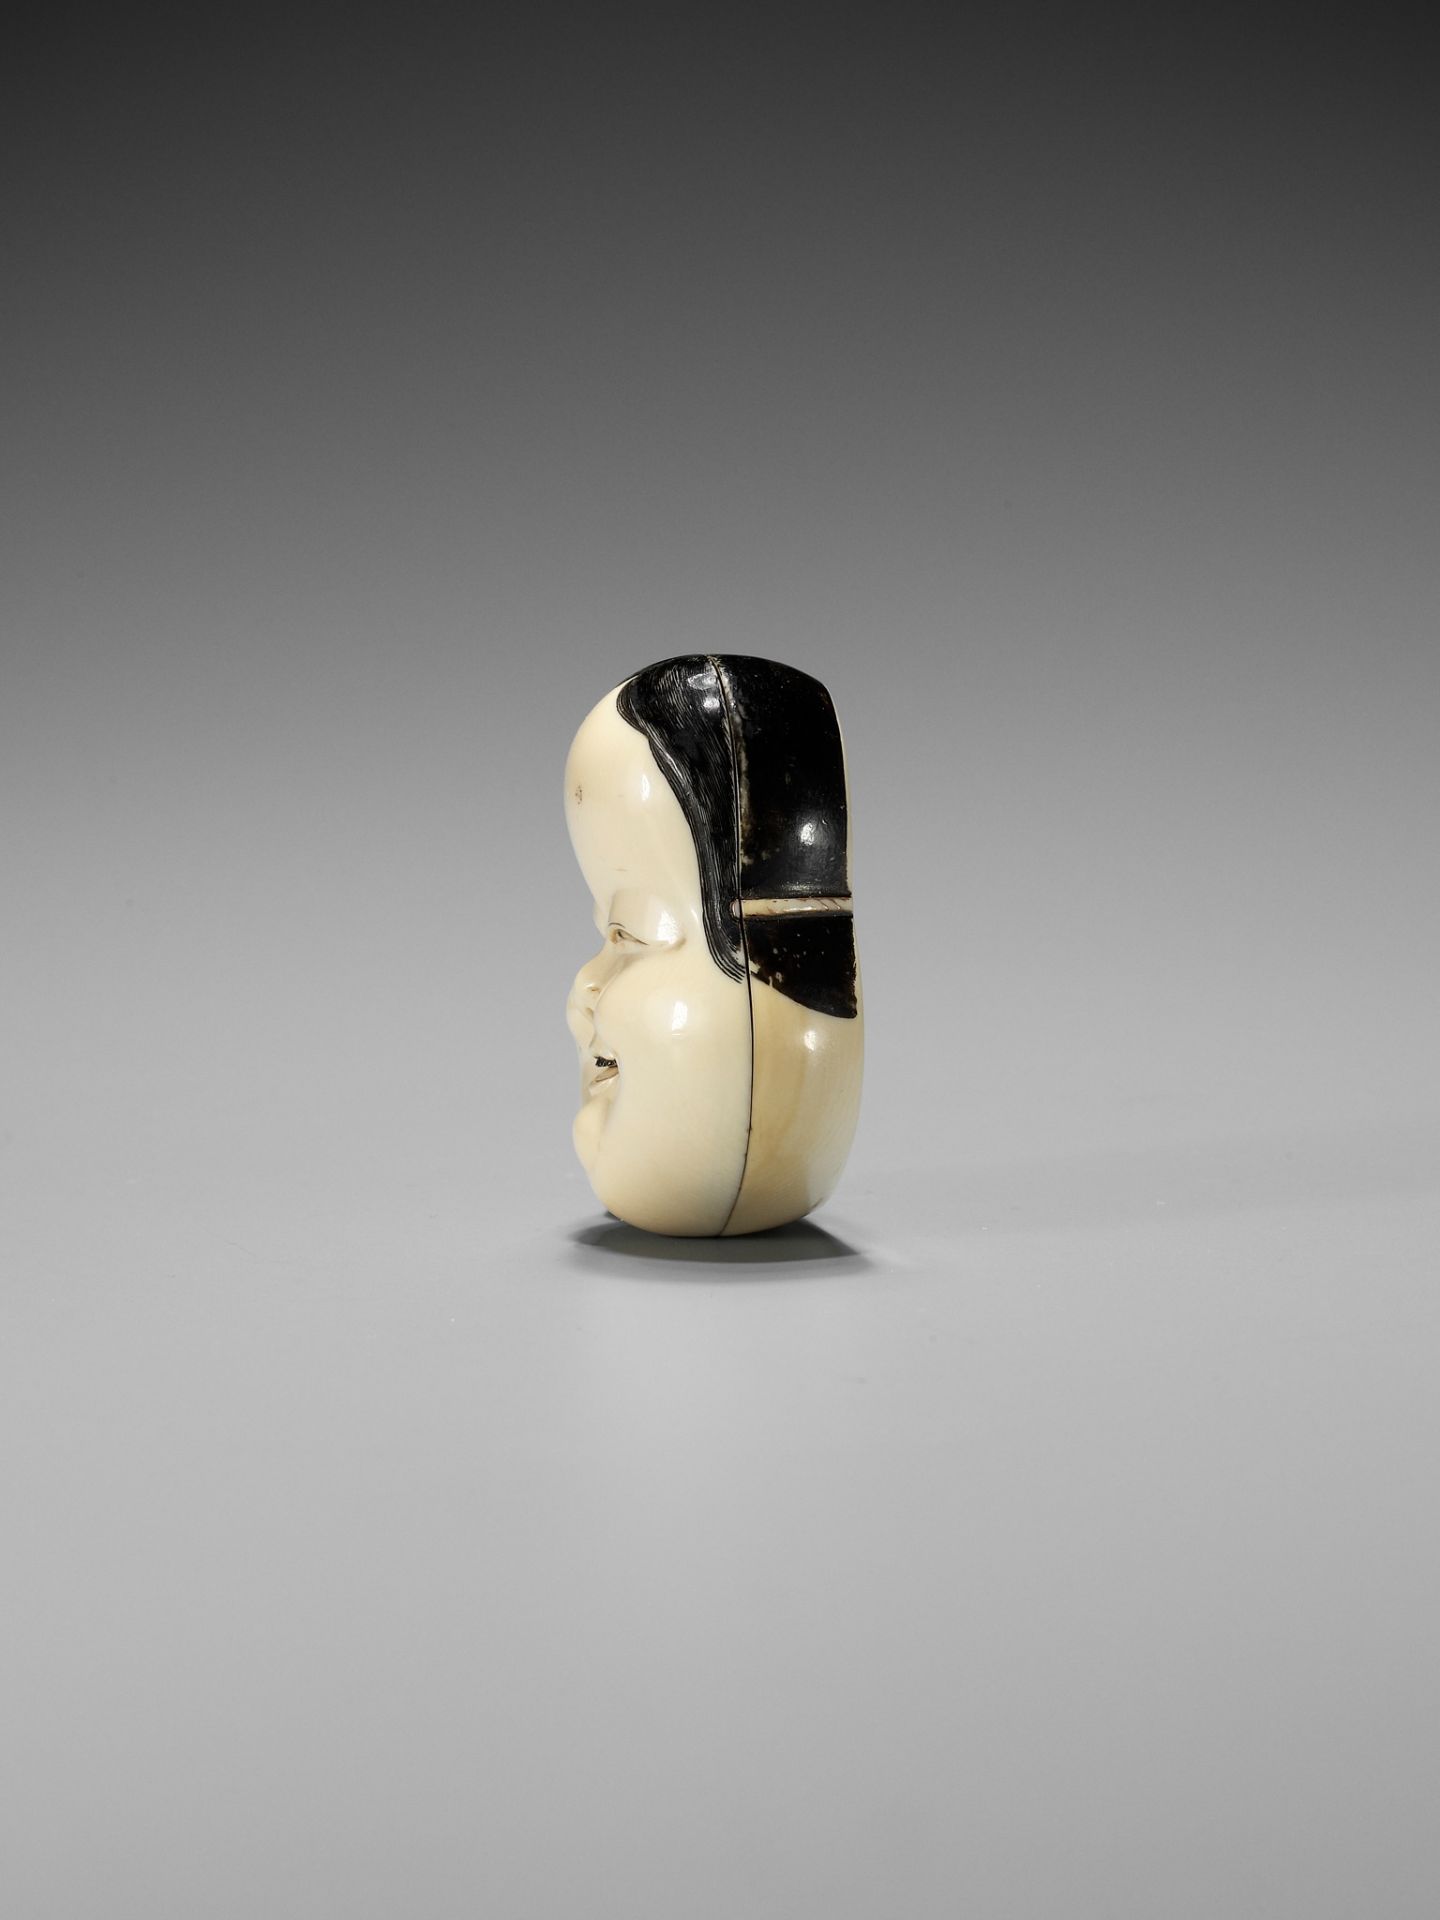 YOZEI: A RARE LACQUERED IVORY HAKO (BOX) AND COVER IN THE FORM OF AN OKAME MASK, DATED 1705 - Image 7 of 10